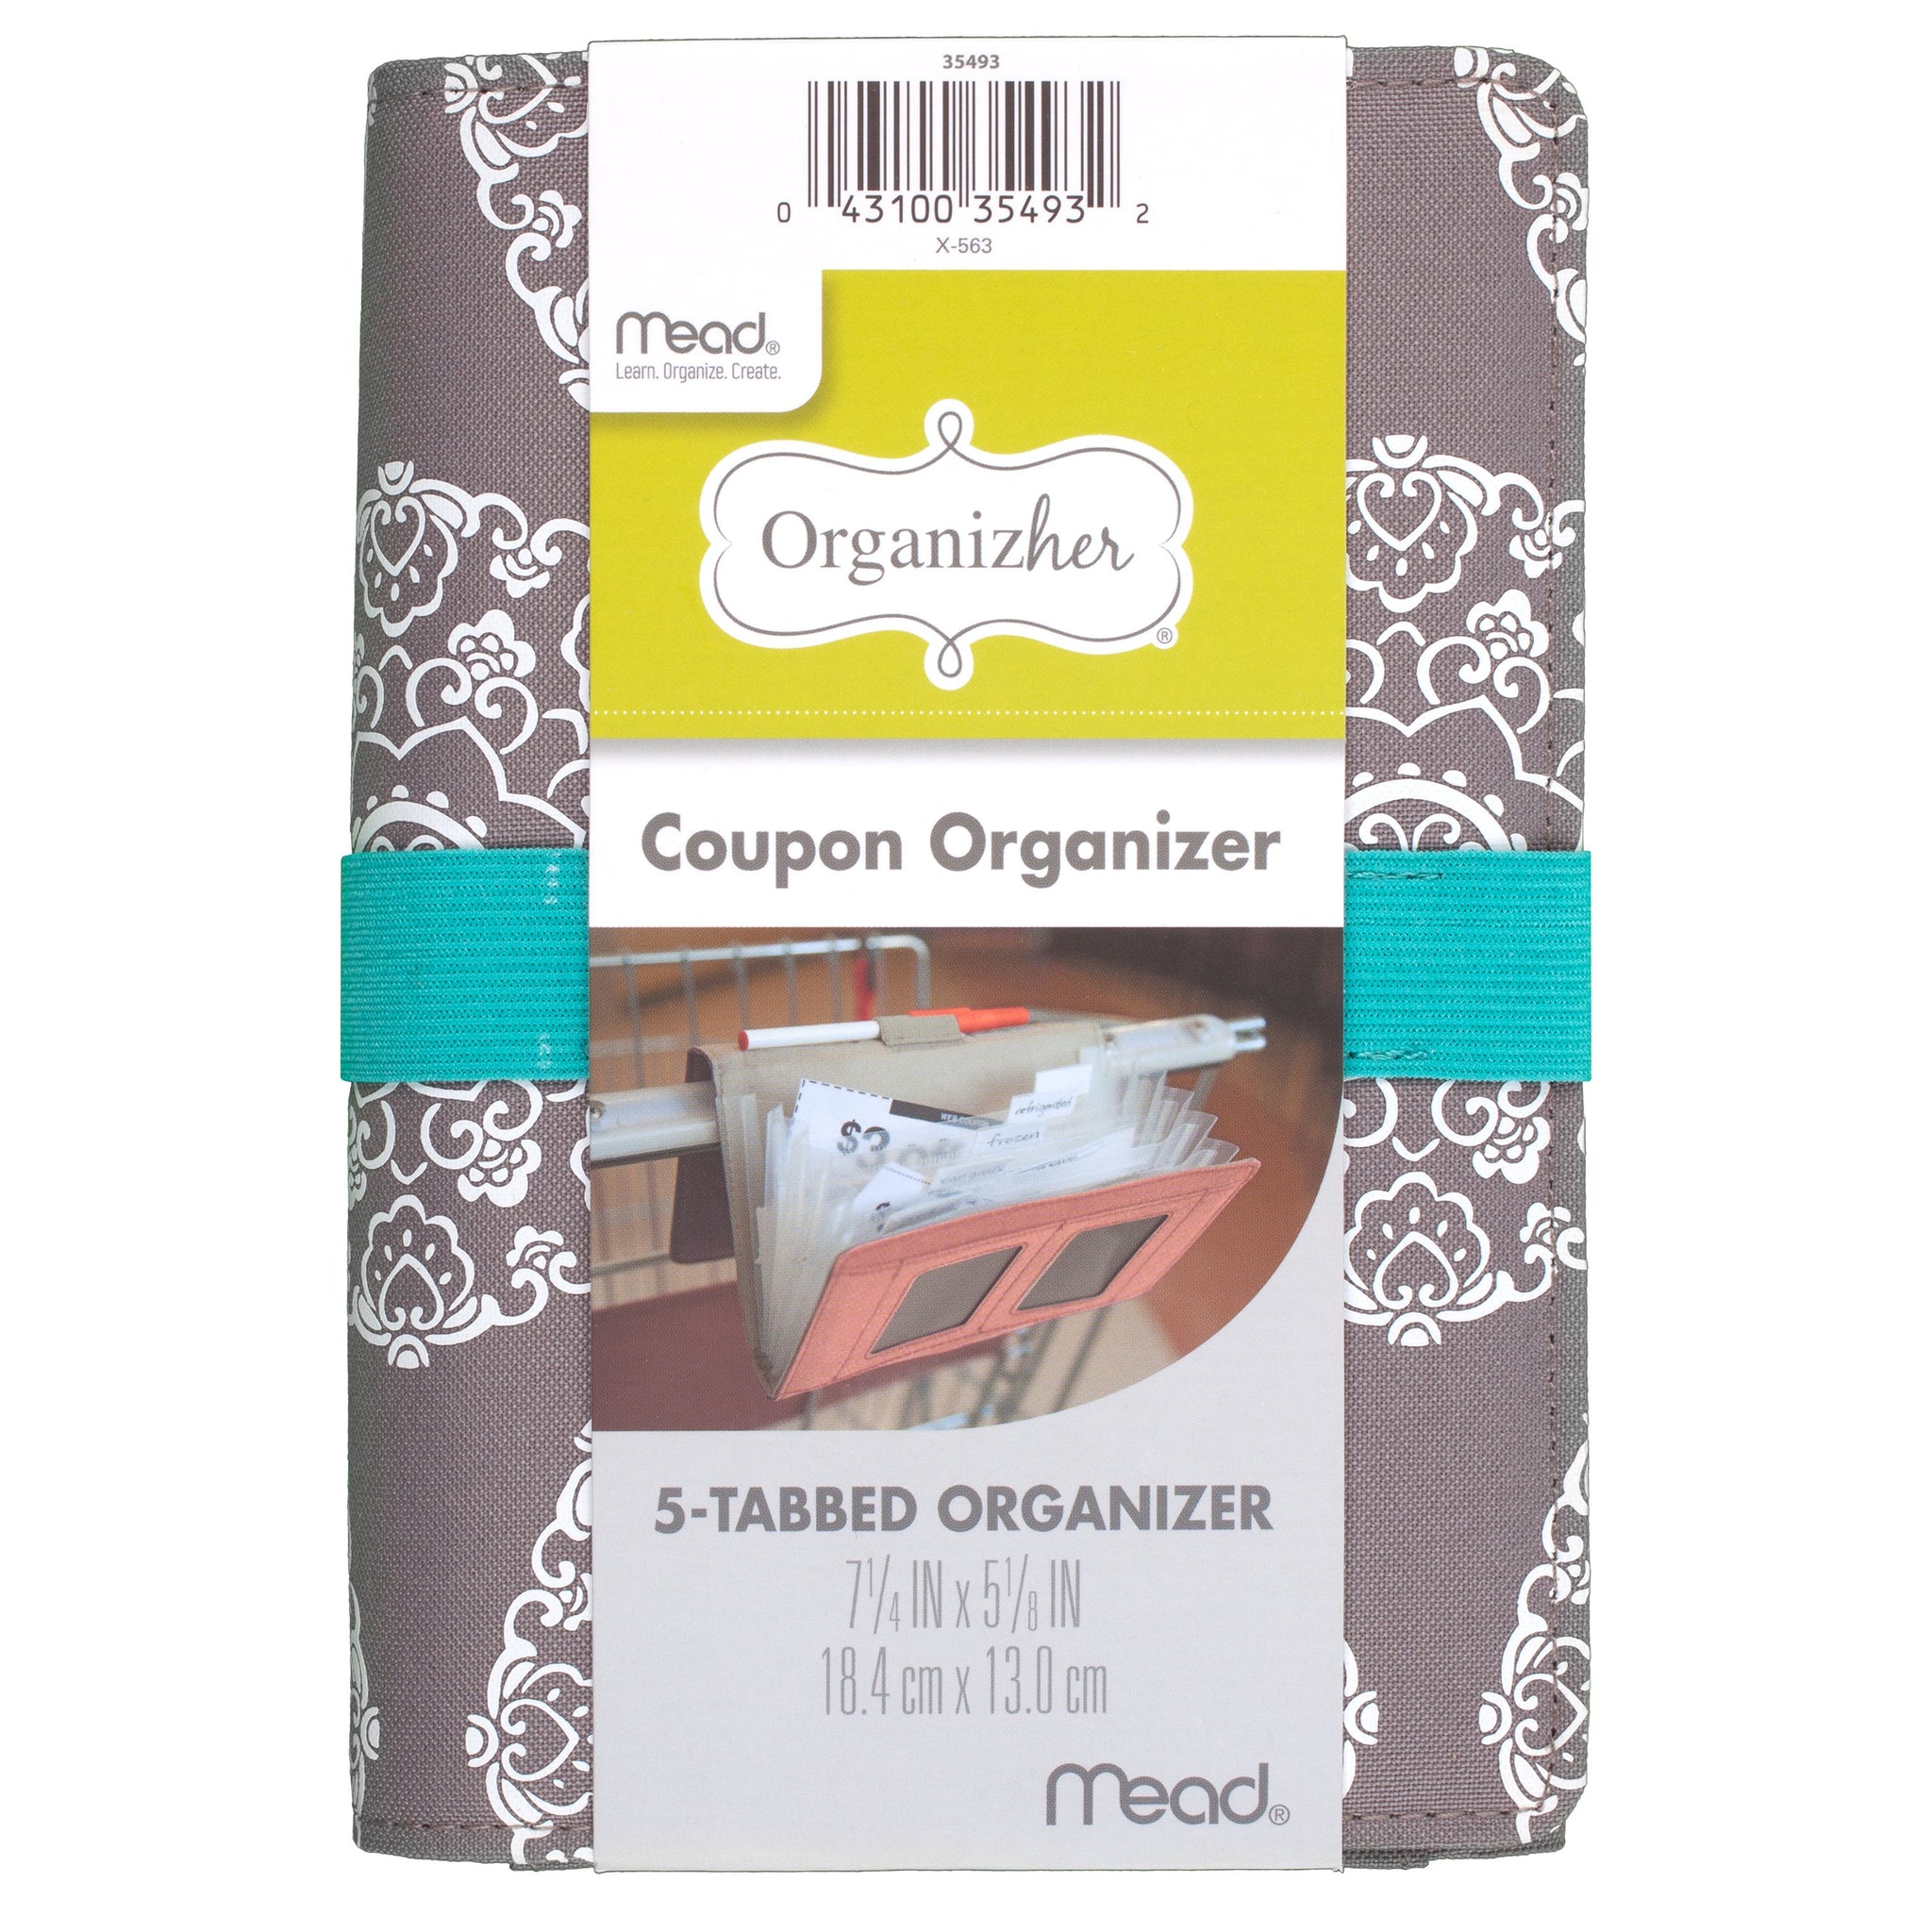 Mead Organizher Coupon Organizer, Fabric Cover 7 1/4" x 5 1/8" (35493)